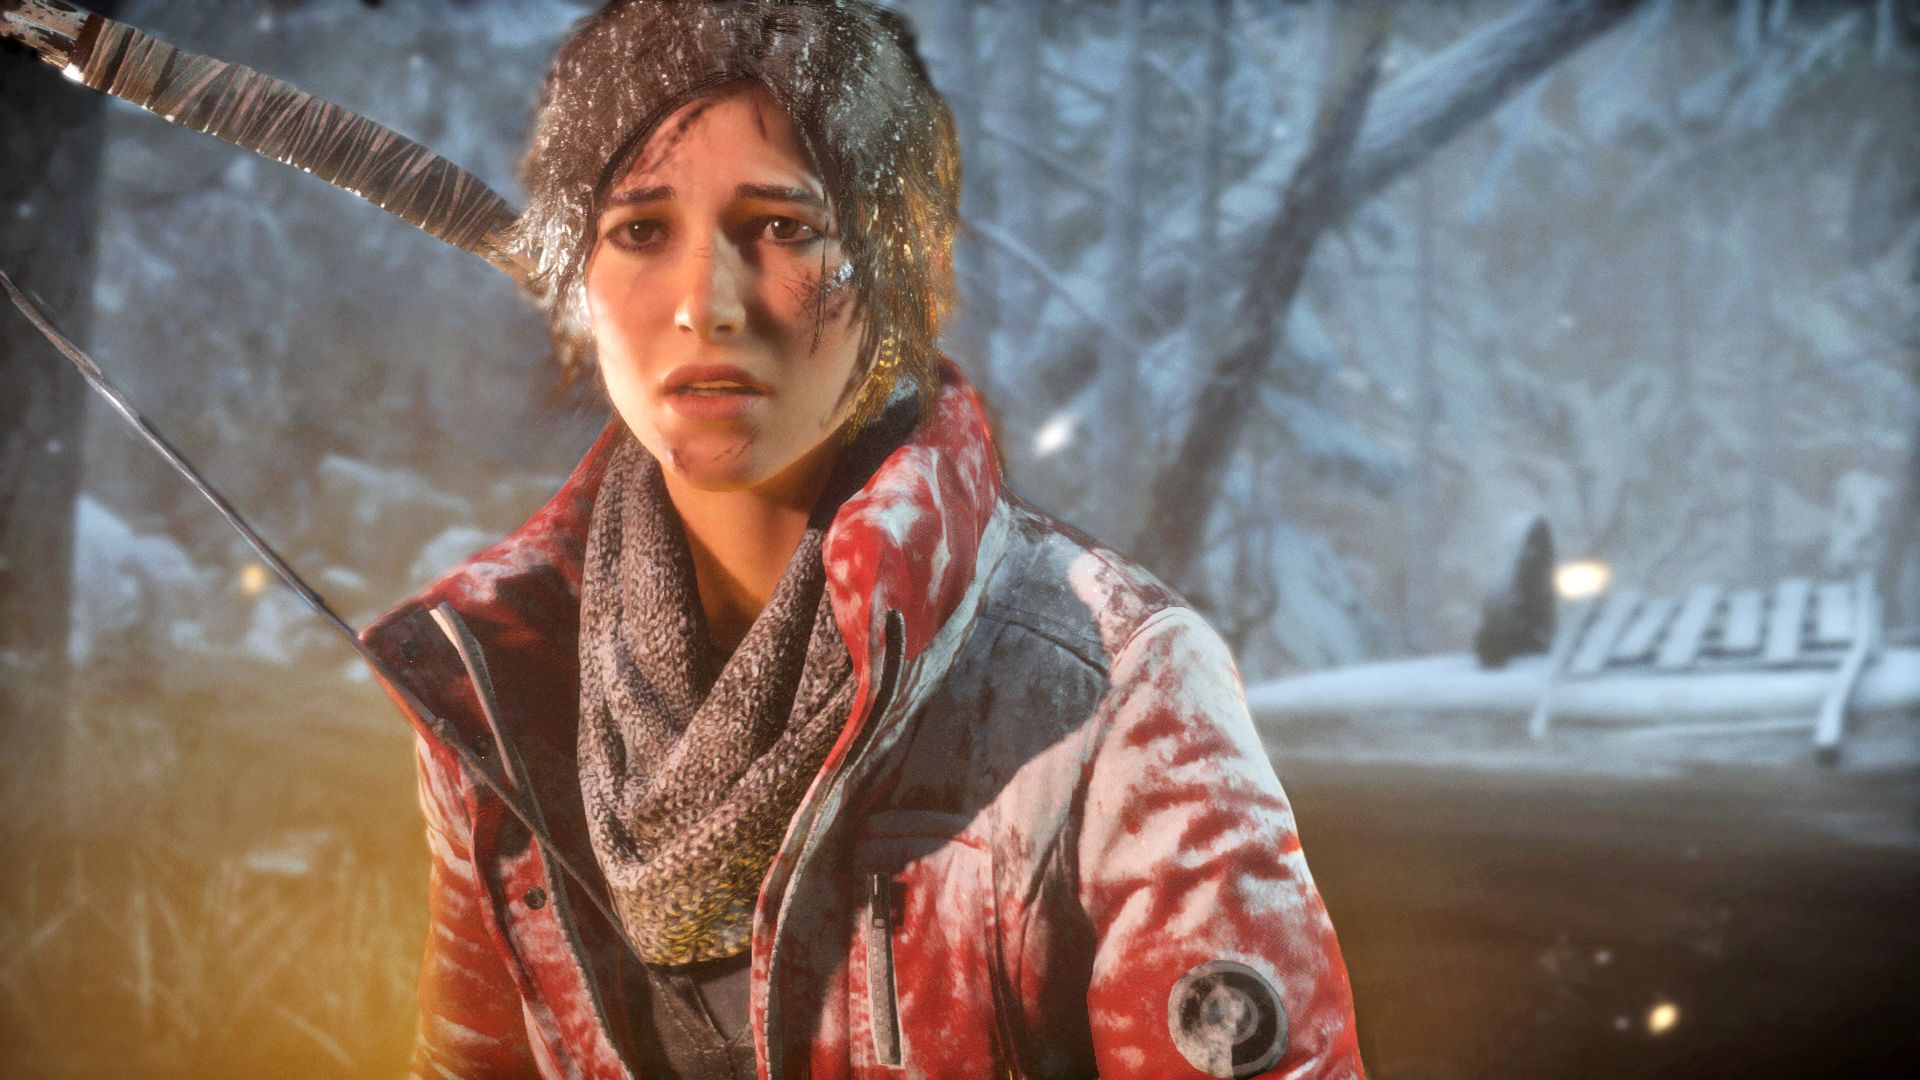 Rise of the Tomb Raider Full Game Walkthrough No Commentary 